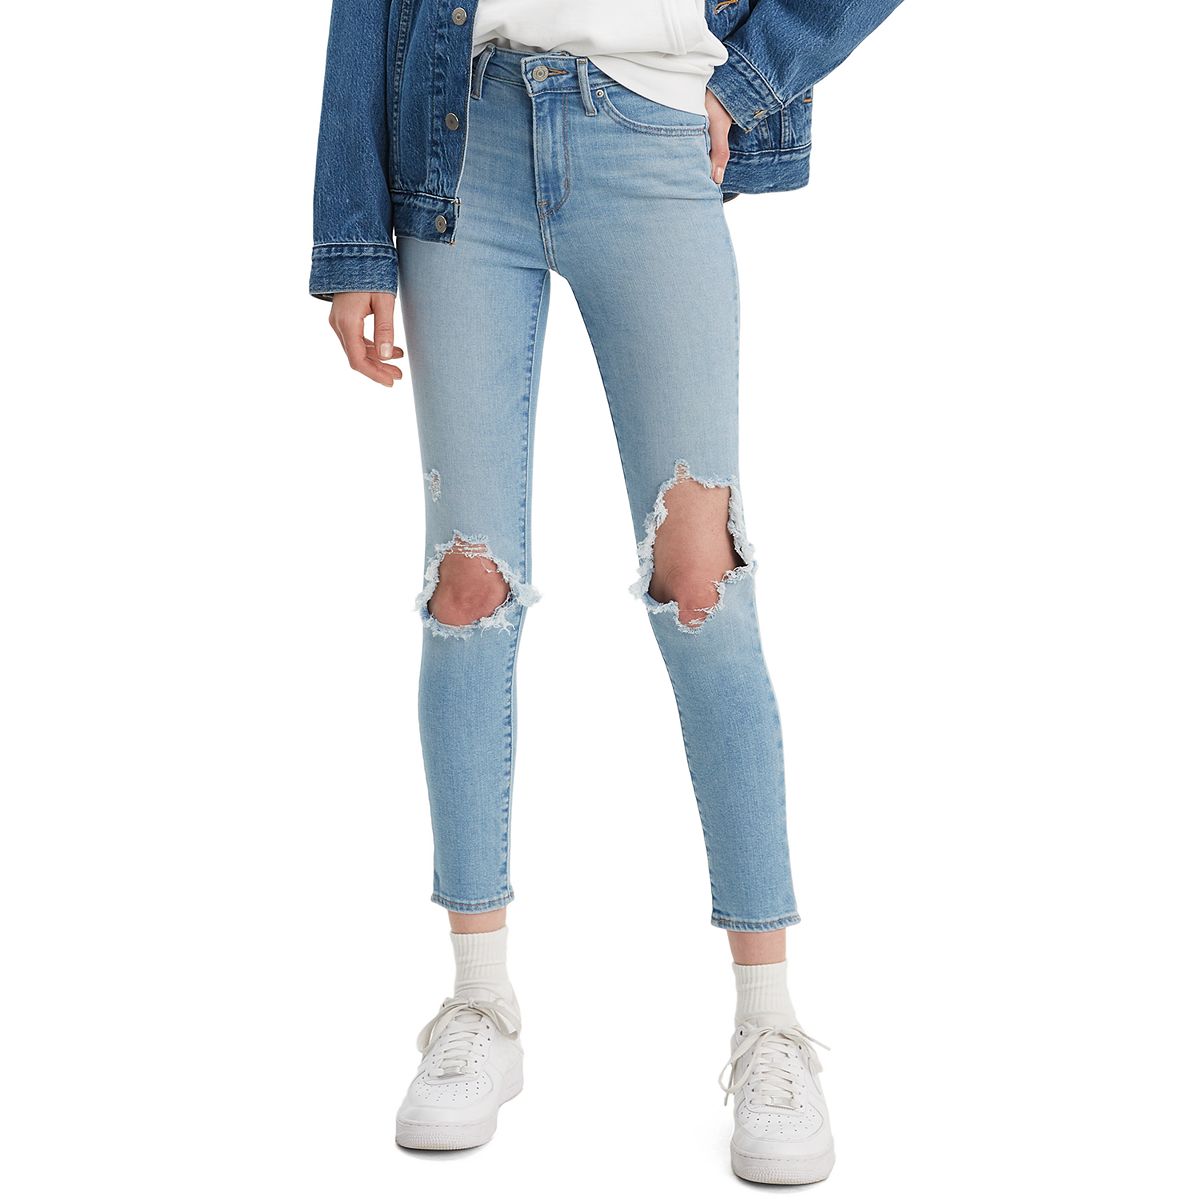 Women's Levi's Skinny Jeans: Shop for Denim Essentials for Your Wardrobe |  Kohl's